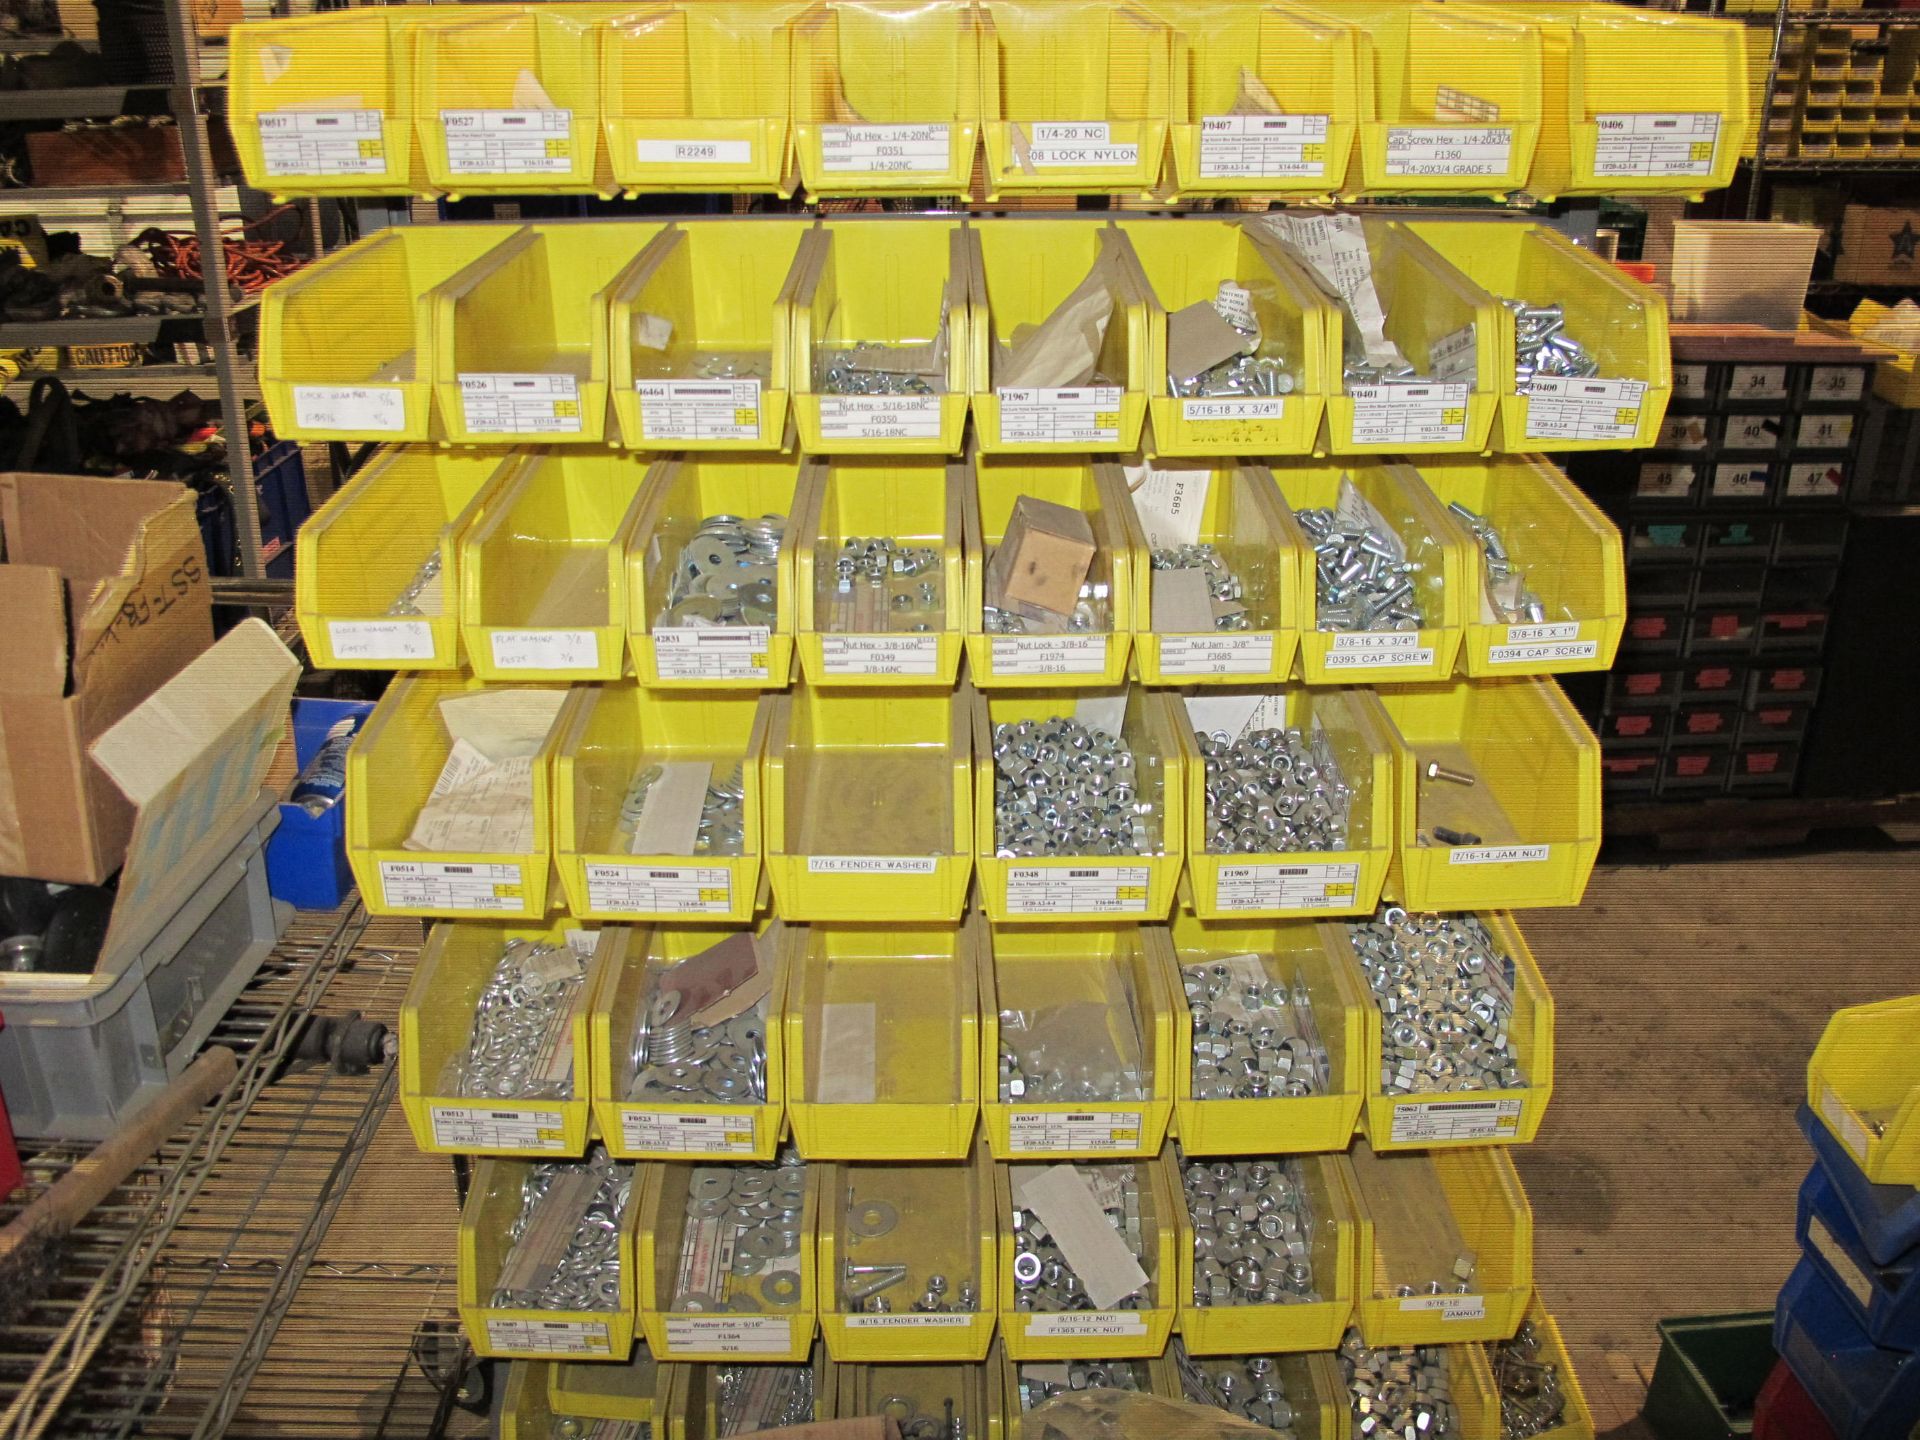 PLASTIC INVENTORY BINS WITH MISC. HARDWARE: WASHERS, NUTS, BOLTS